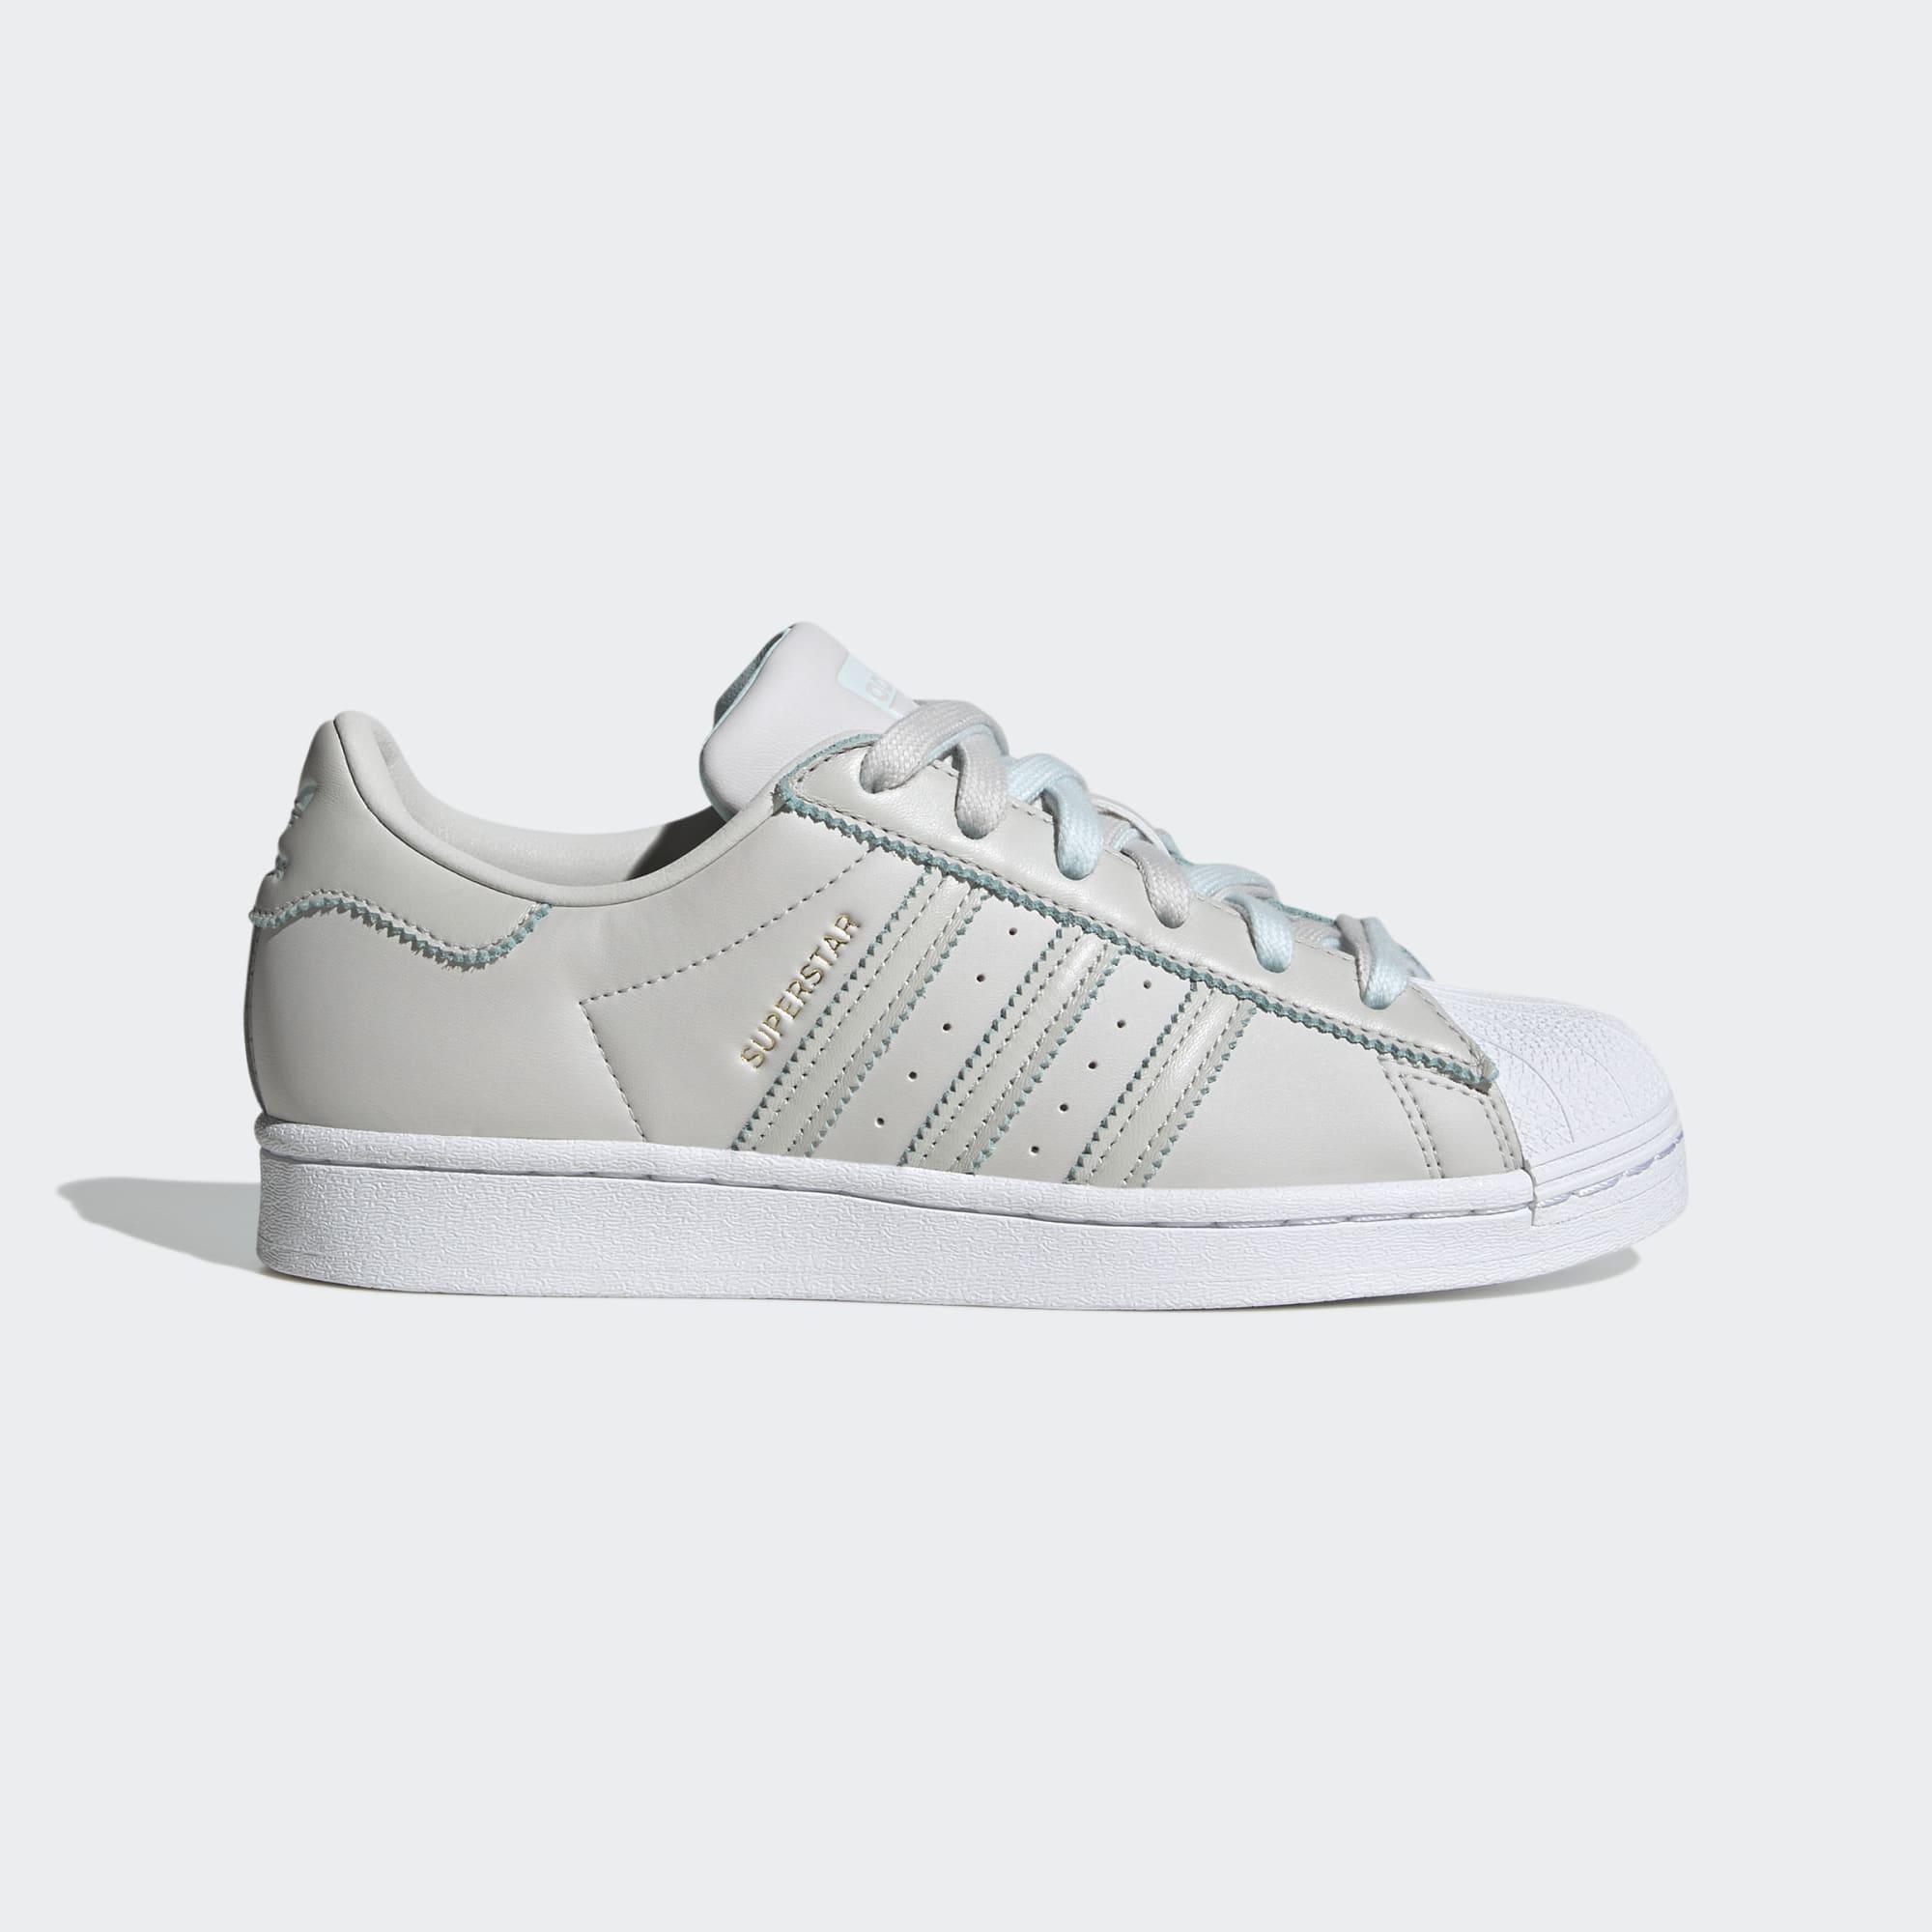 adidas Rubber Superstar Shoes in Grey (Grey) | Lyst UK